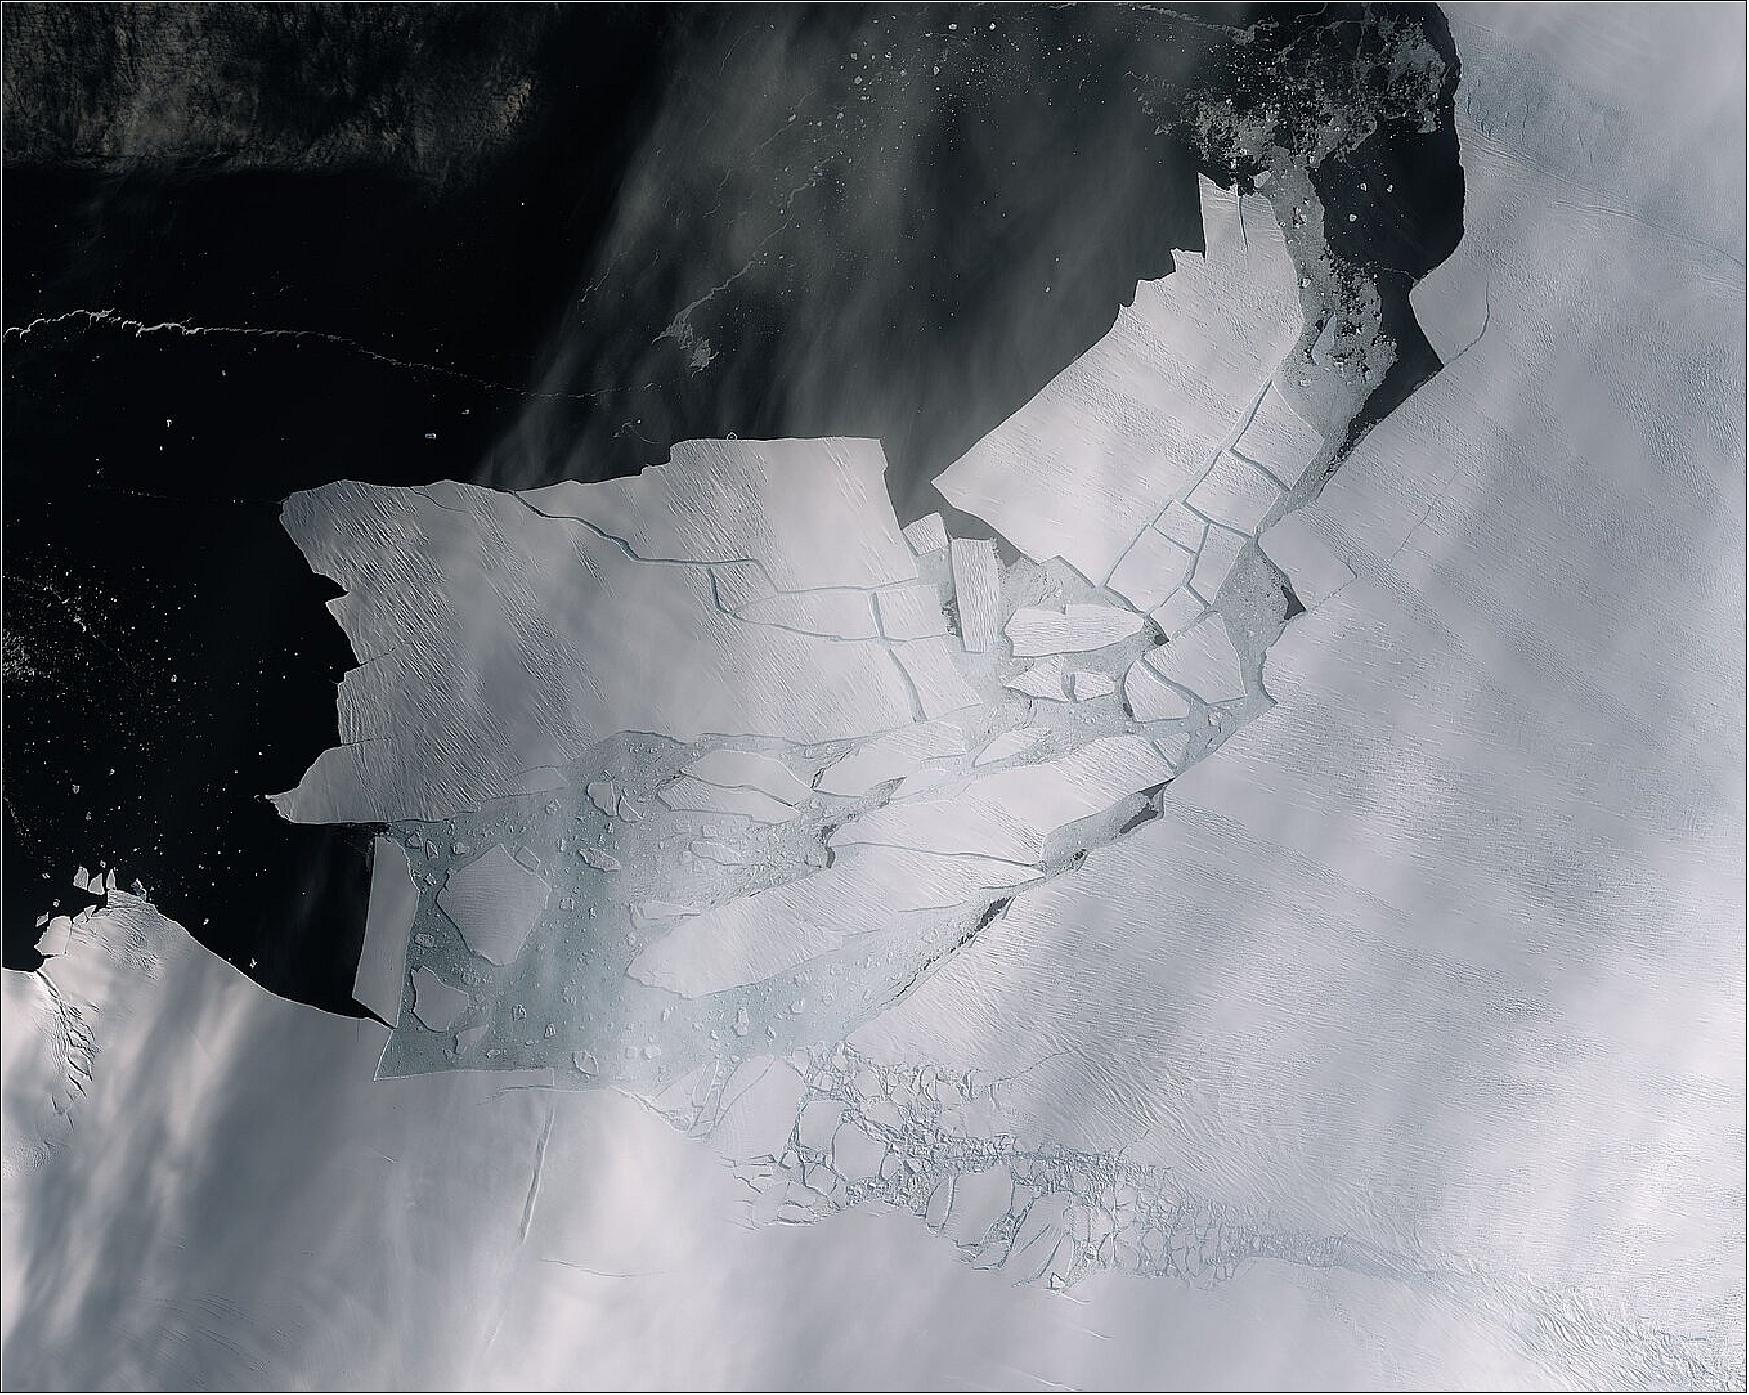 Figure 62: This image of the Pine Island Glacier, captured on 11 February 2020 by the Copernicus Sentinel-2 mission, shows the freshly broken bergs in detail (image credit: ESA, the image contains modified Copernicus Sentinel data (2020), processed by ESA, CC BY-SA 3.0 IGO)